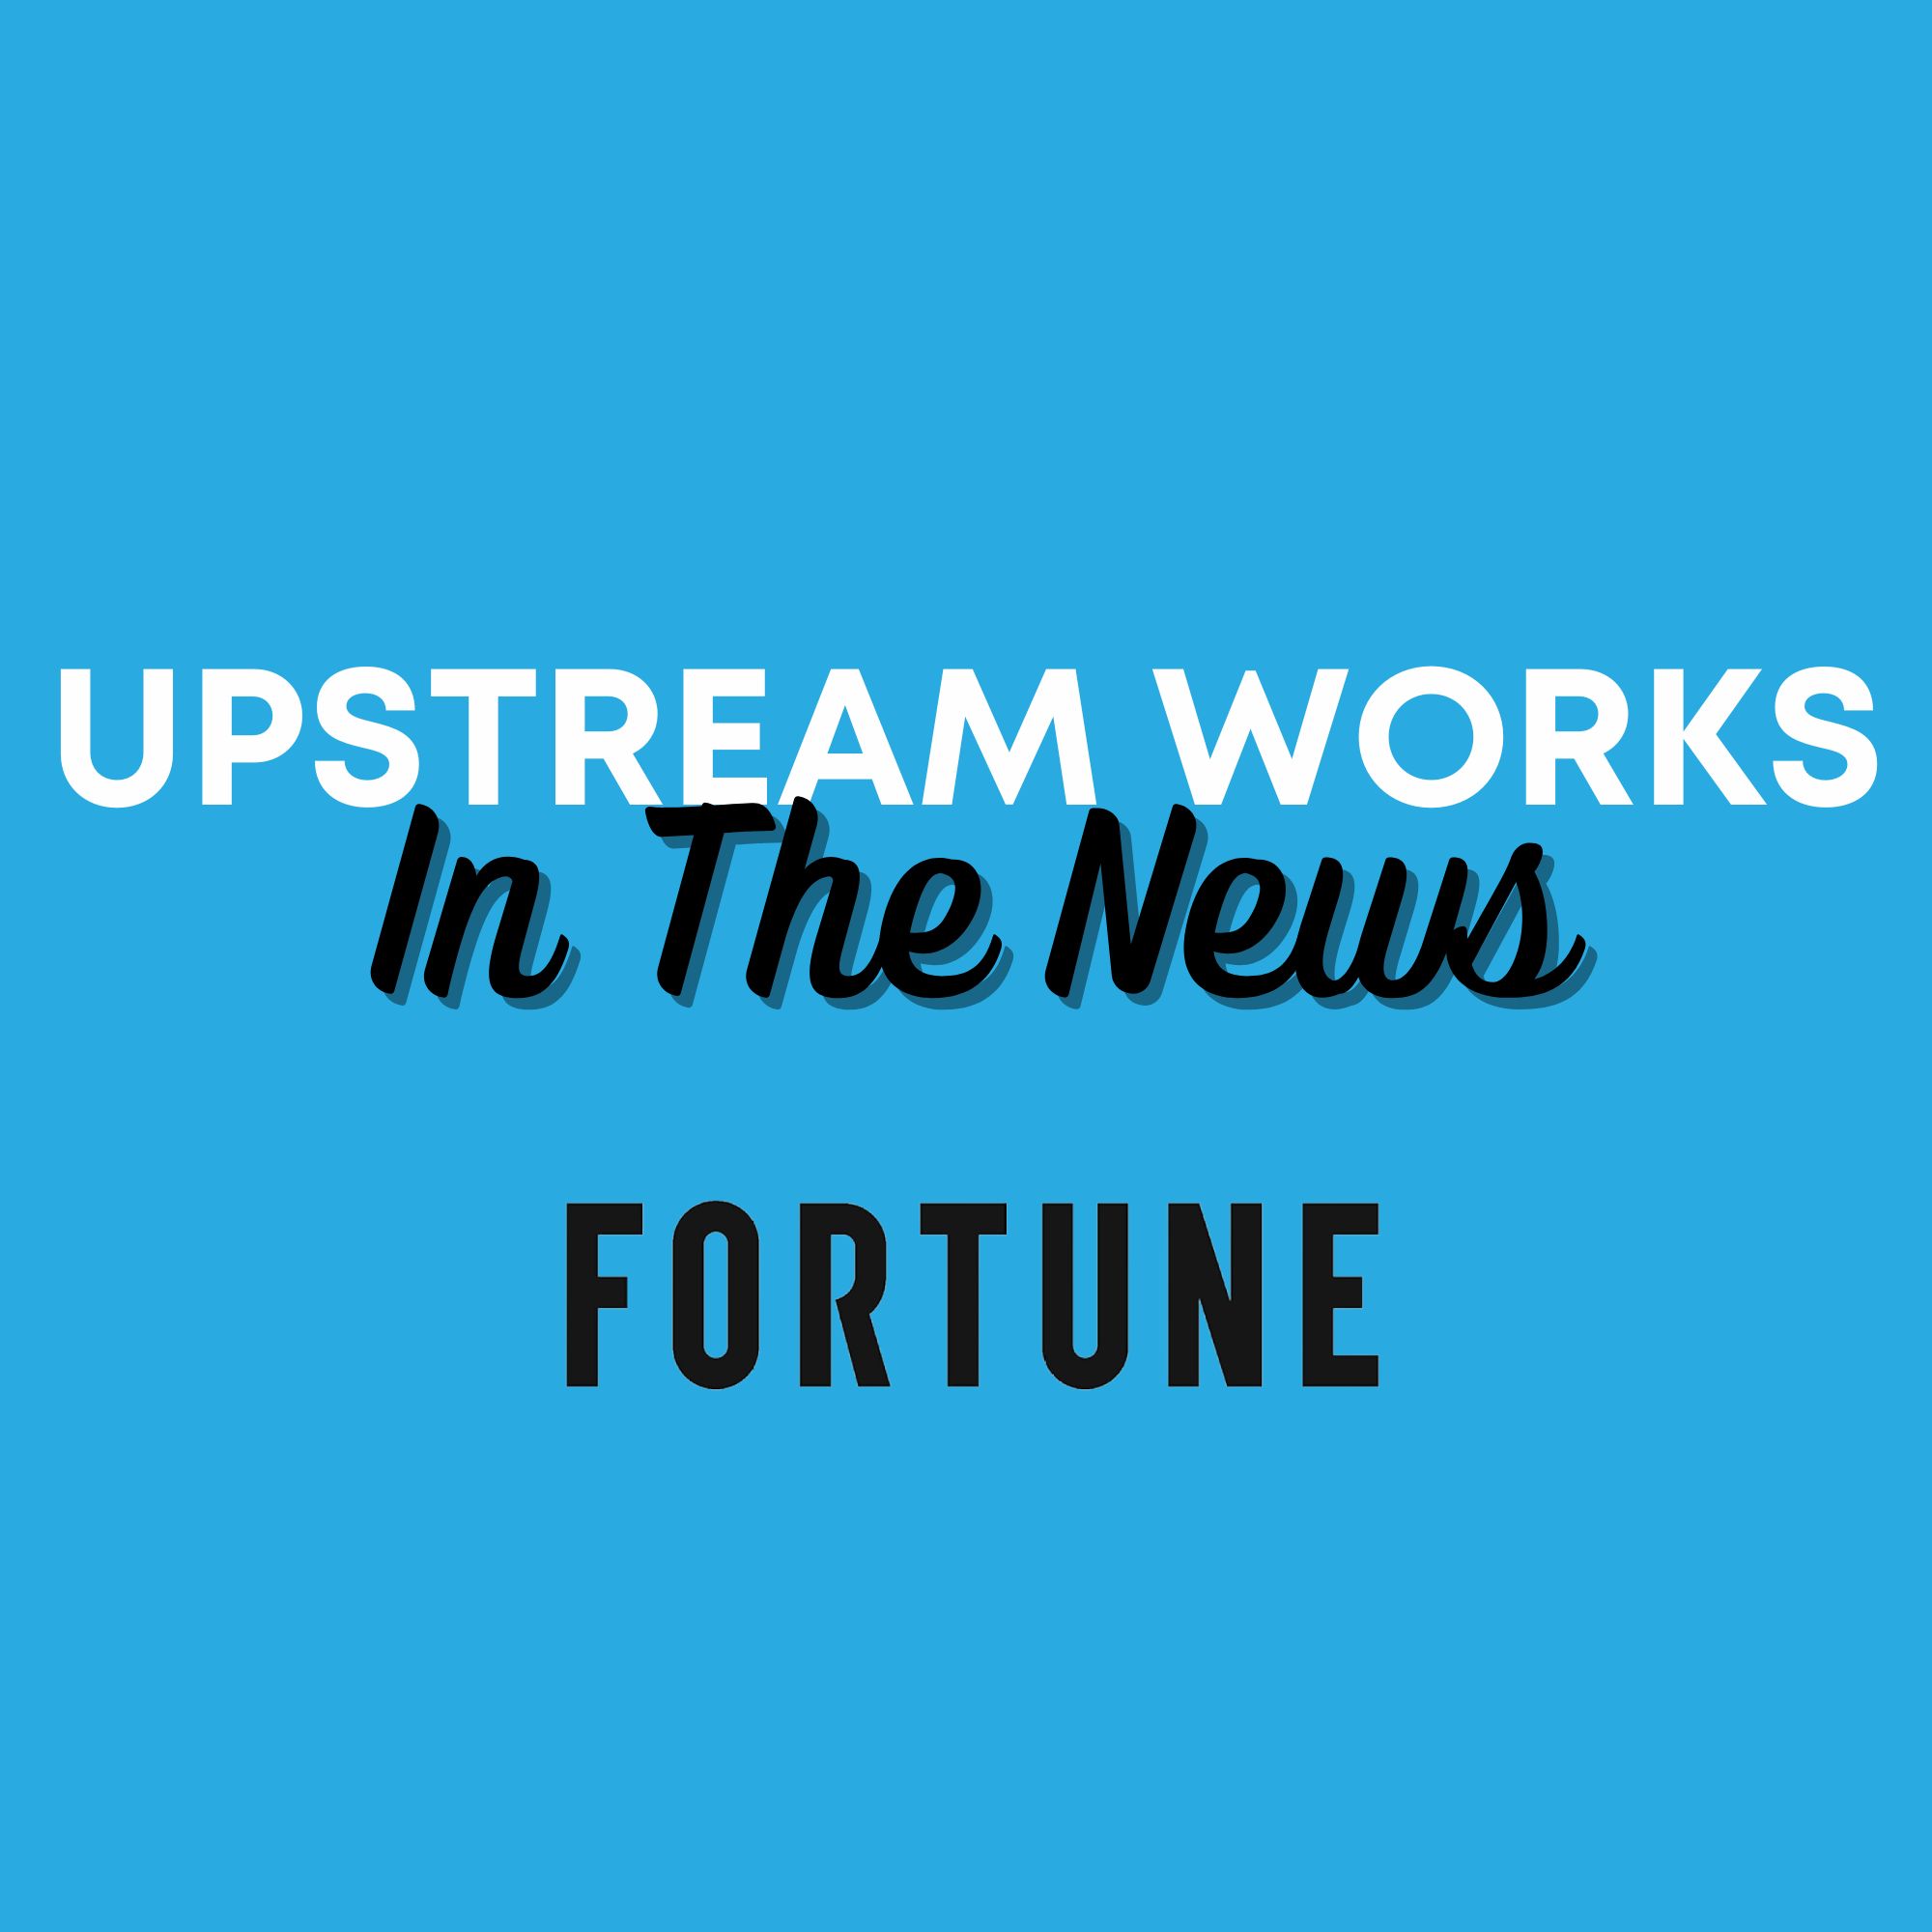 Upstream Works in the news Fortune